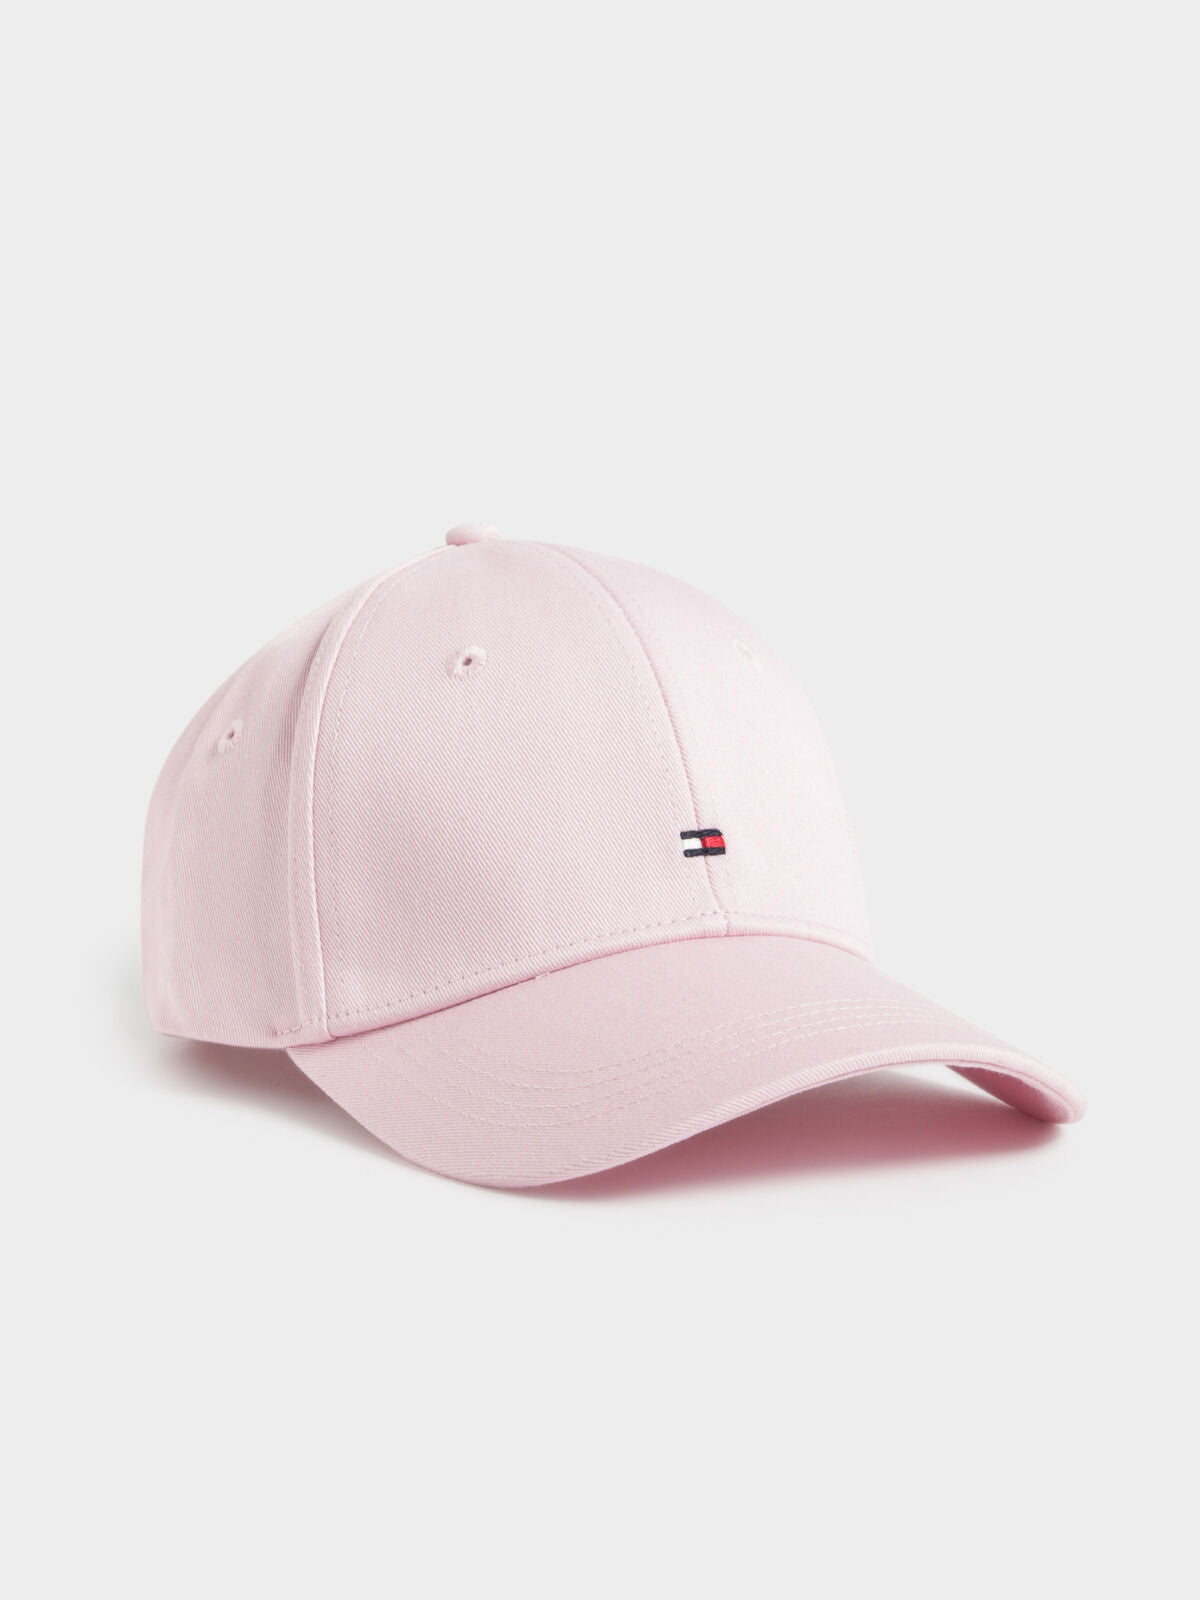 Embroidery Baseball Cap in Pale Pink